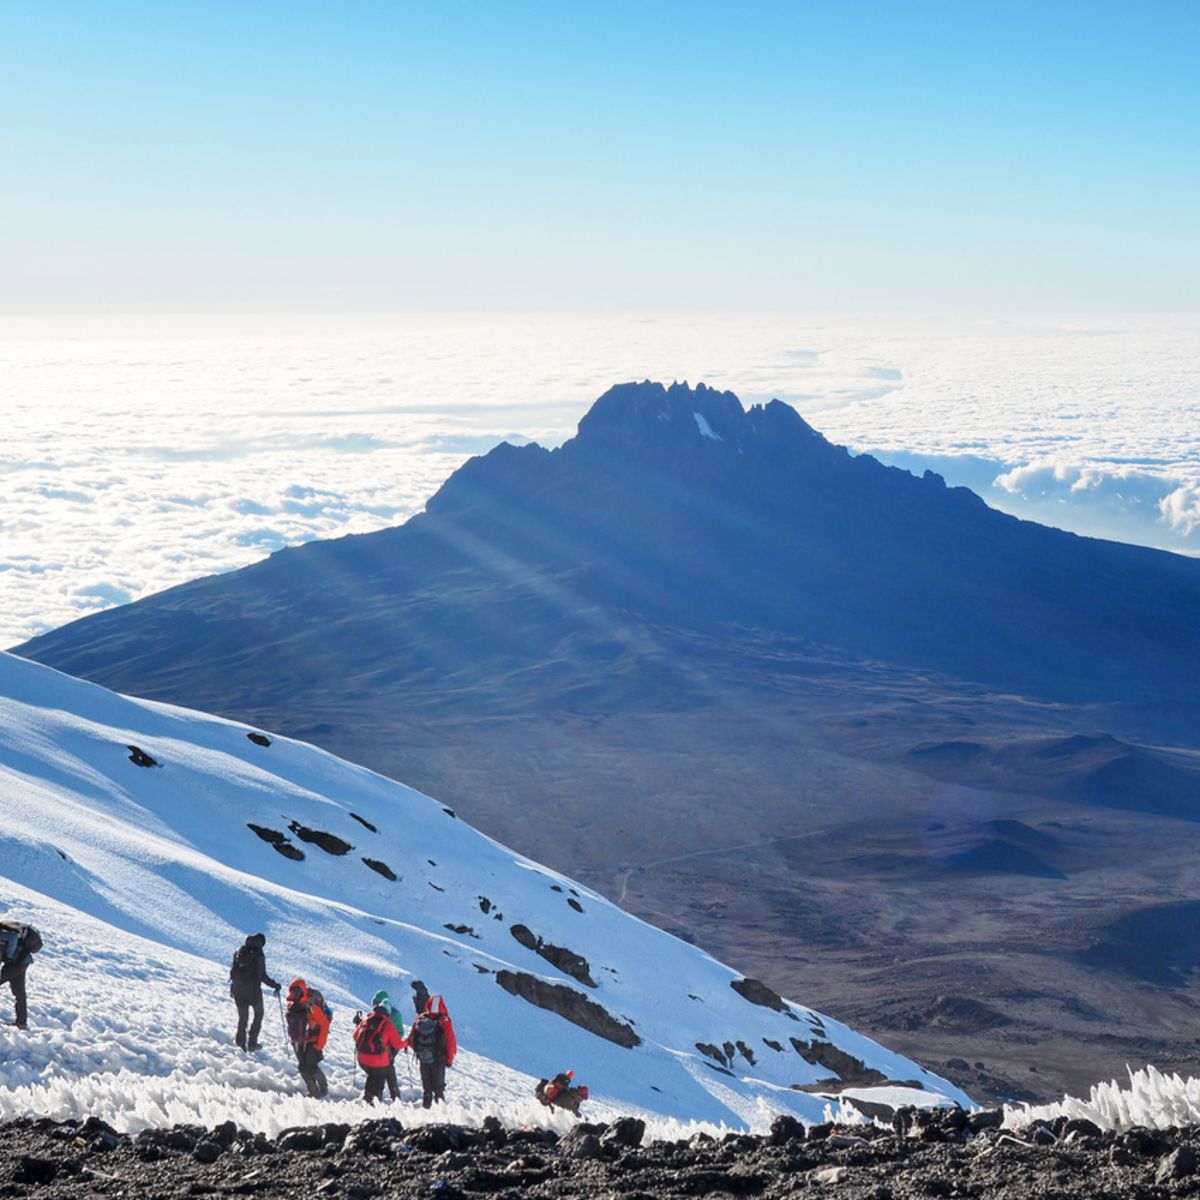 Hikers on the ridge in snow ascend mount Kilimanjaro summit with clouds and Mawenzi in background (1)